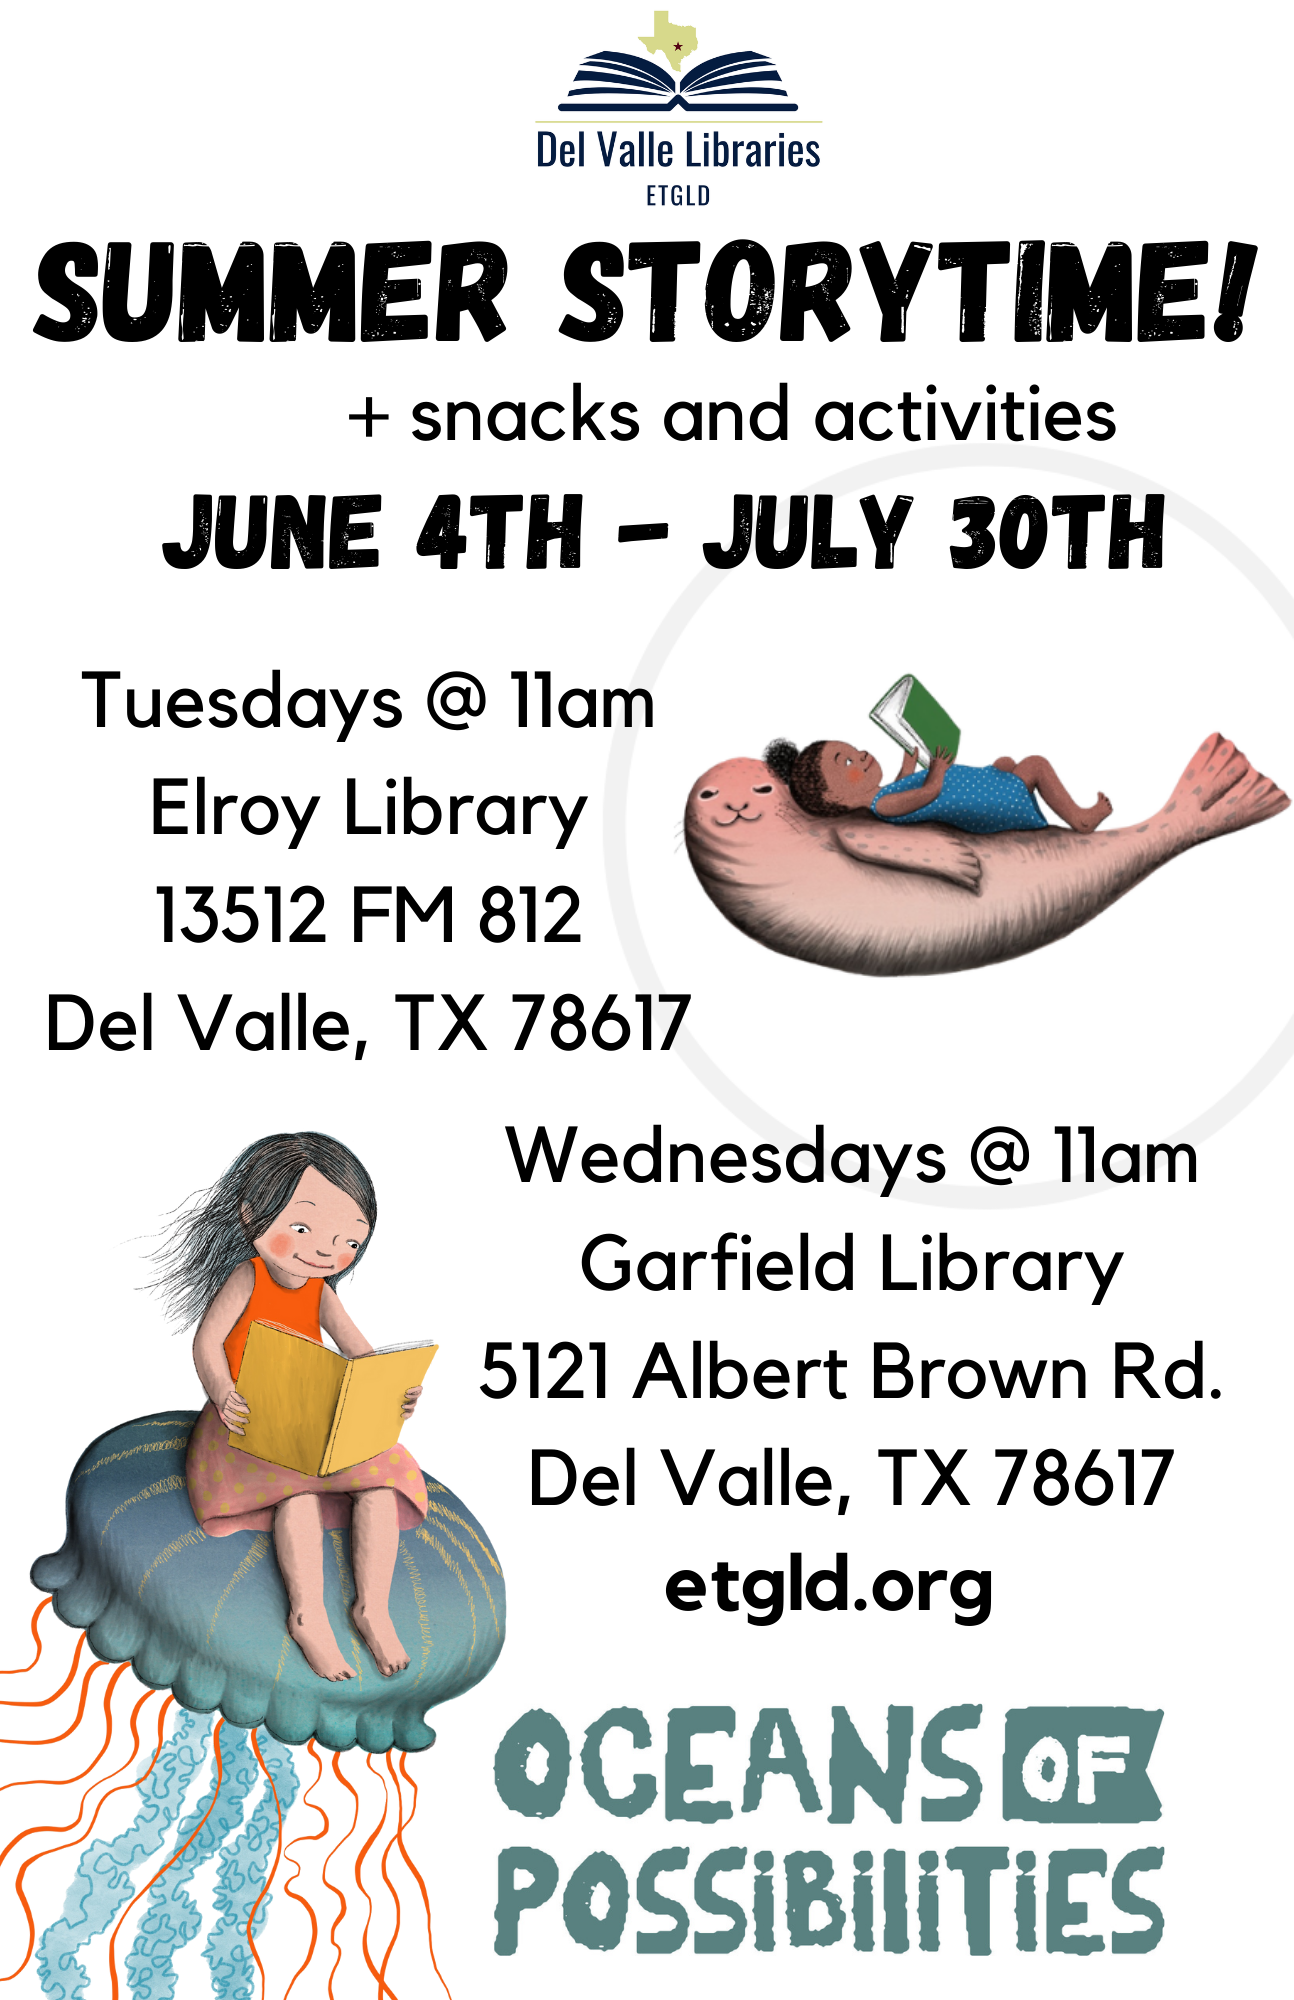 Summer storytime at Del Valle Libraries